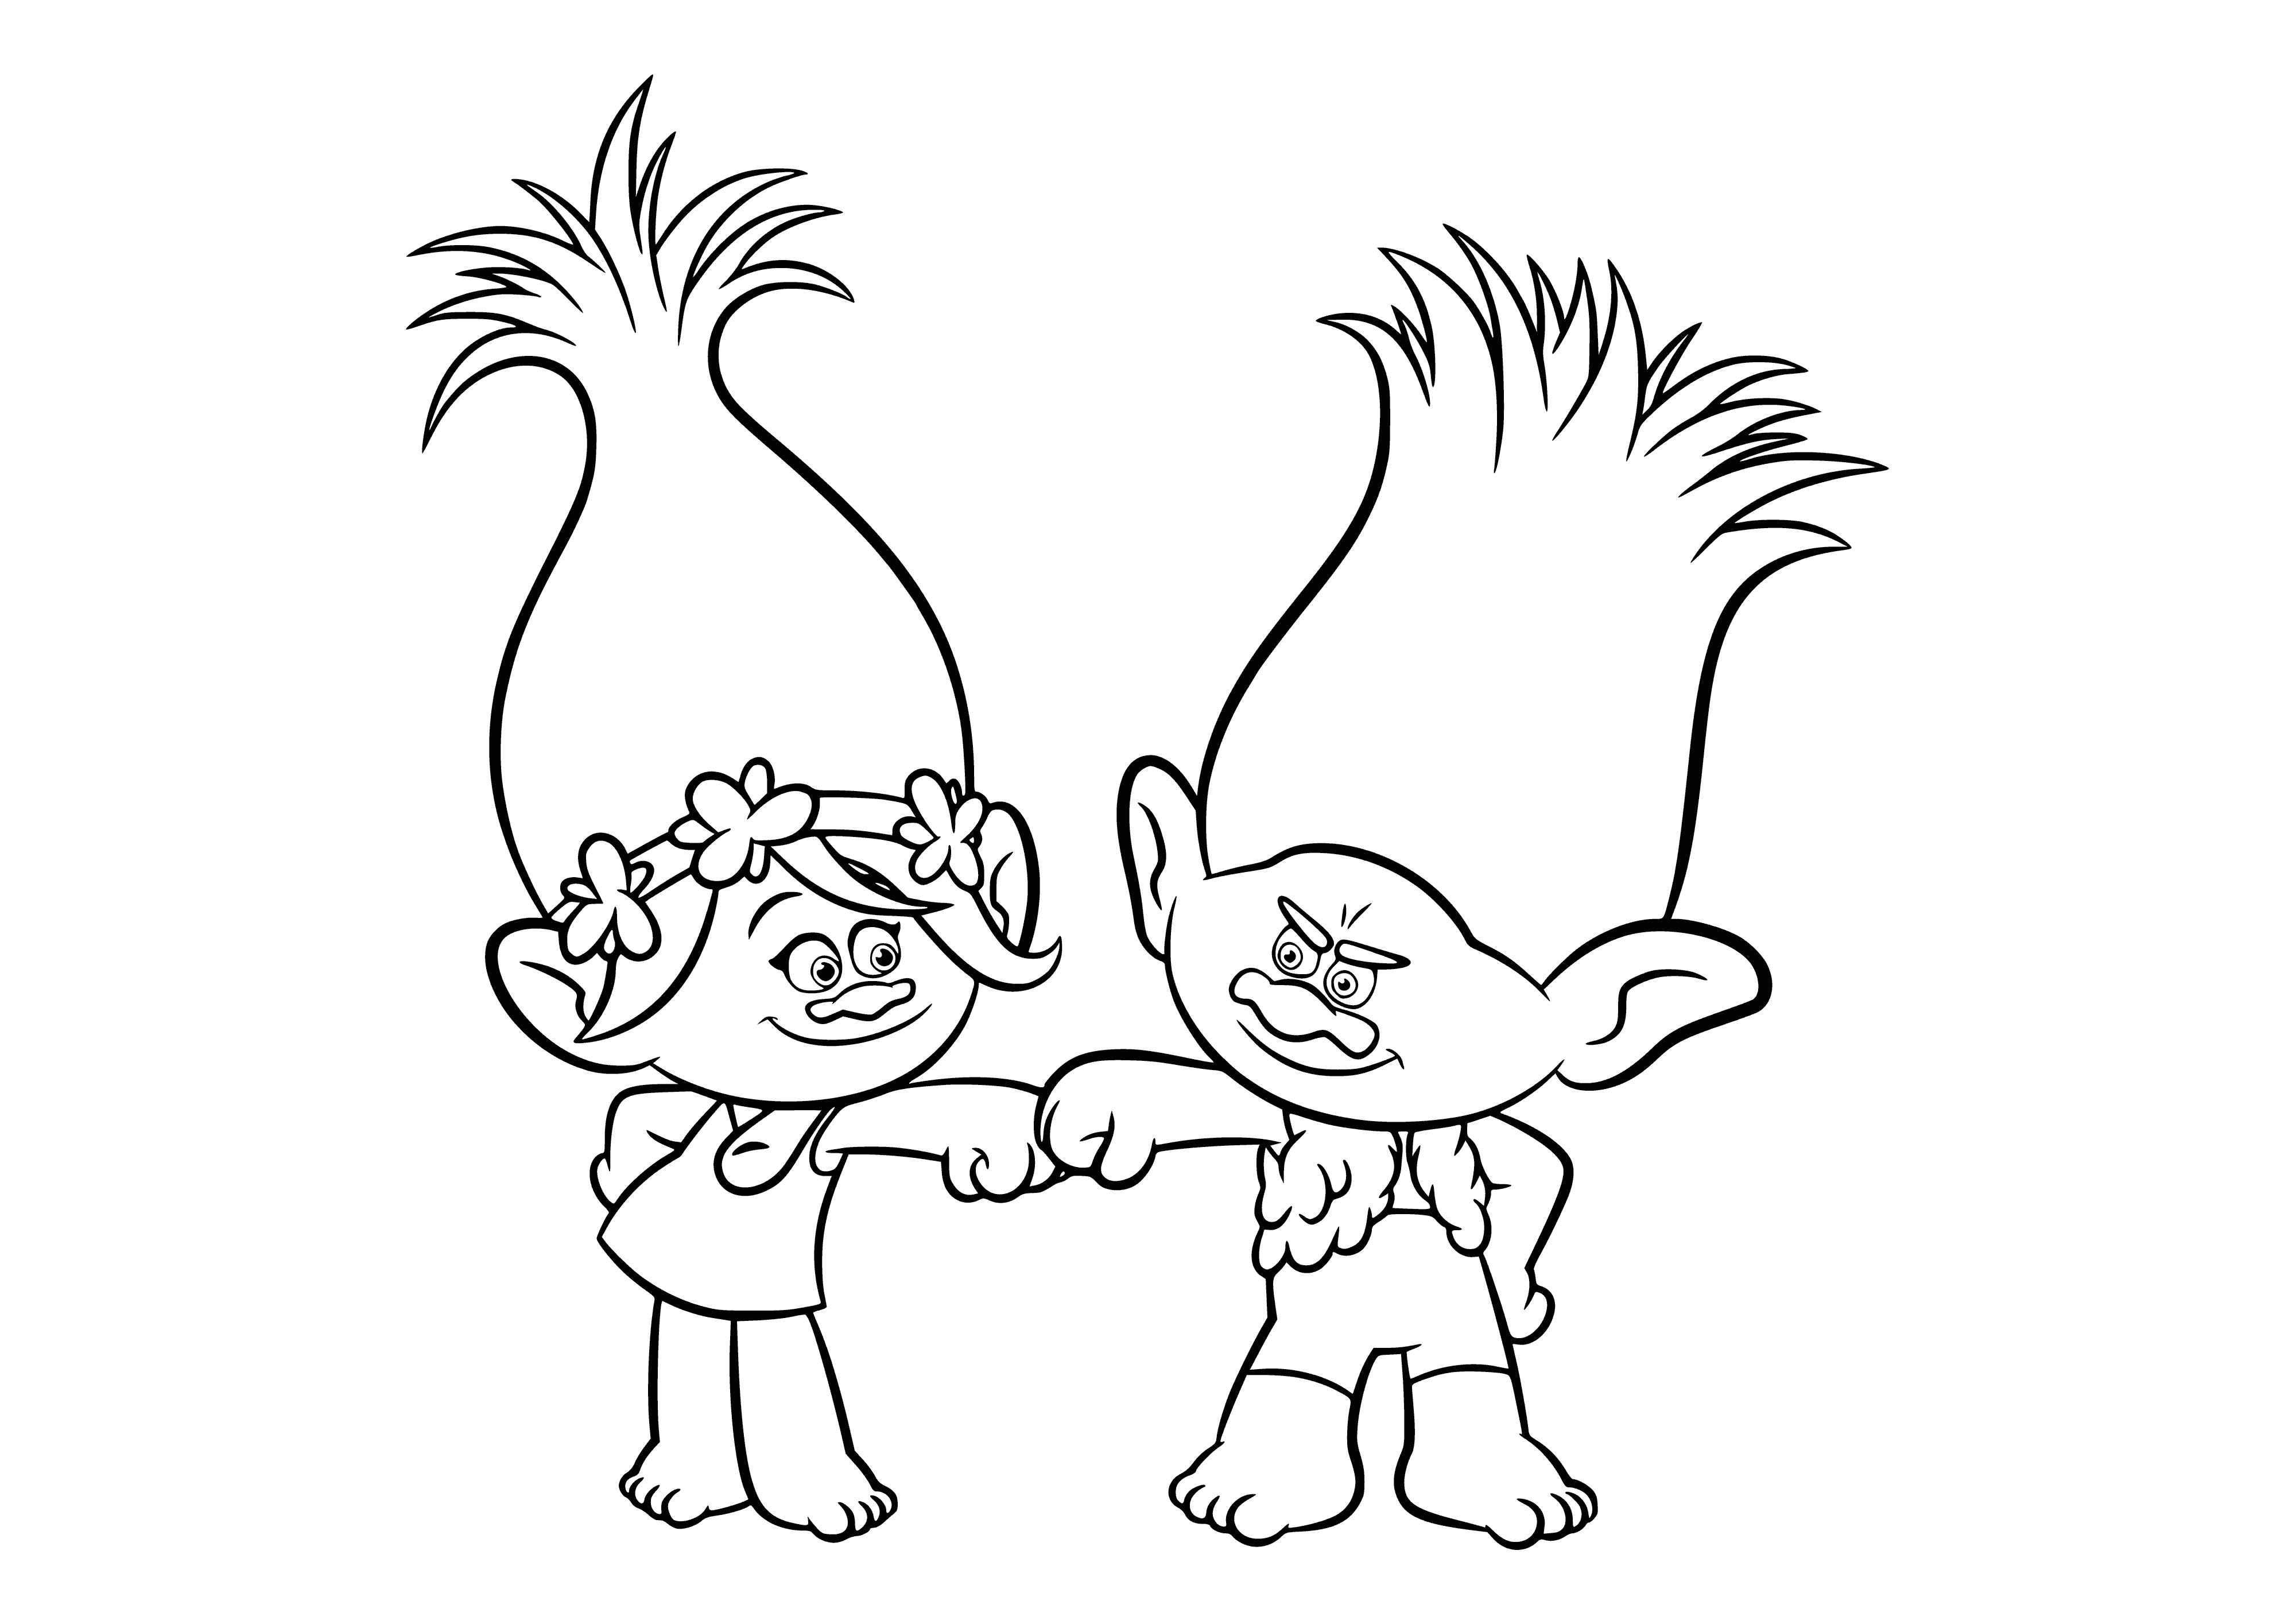 coloring page: Two Trolls, Tsvetan (blue) & Rosochka (red), w/ yellow eyes & black hair, feature in this coloring page.